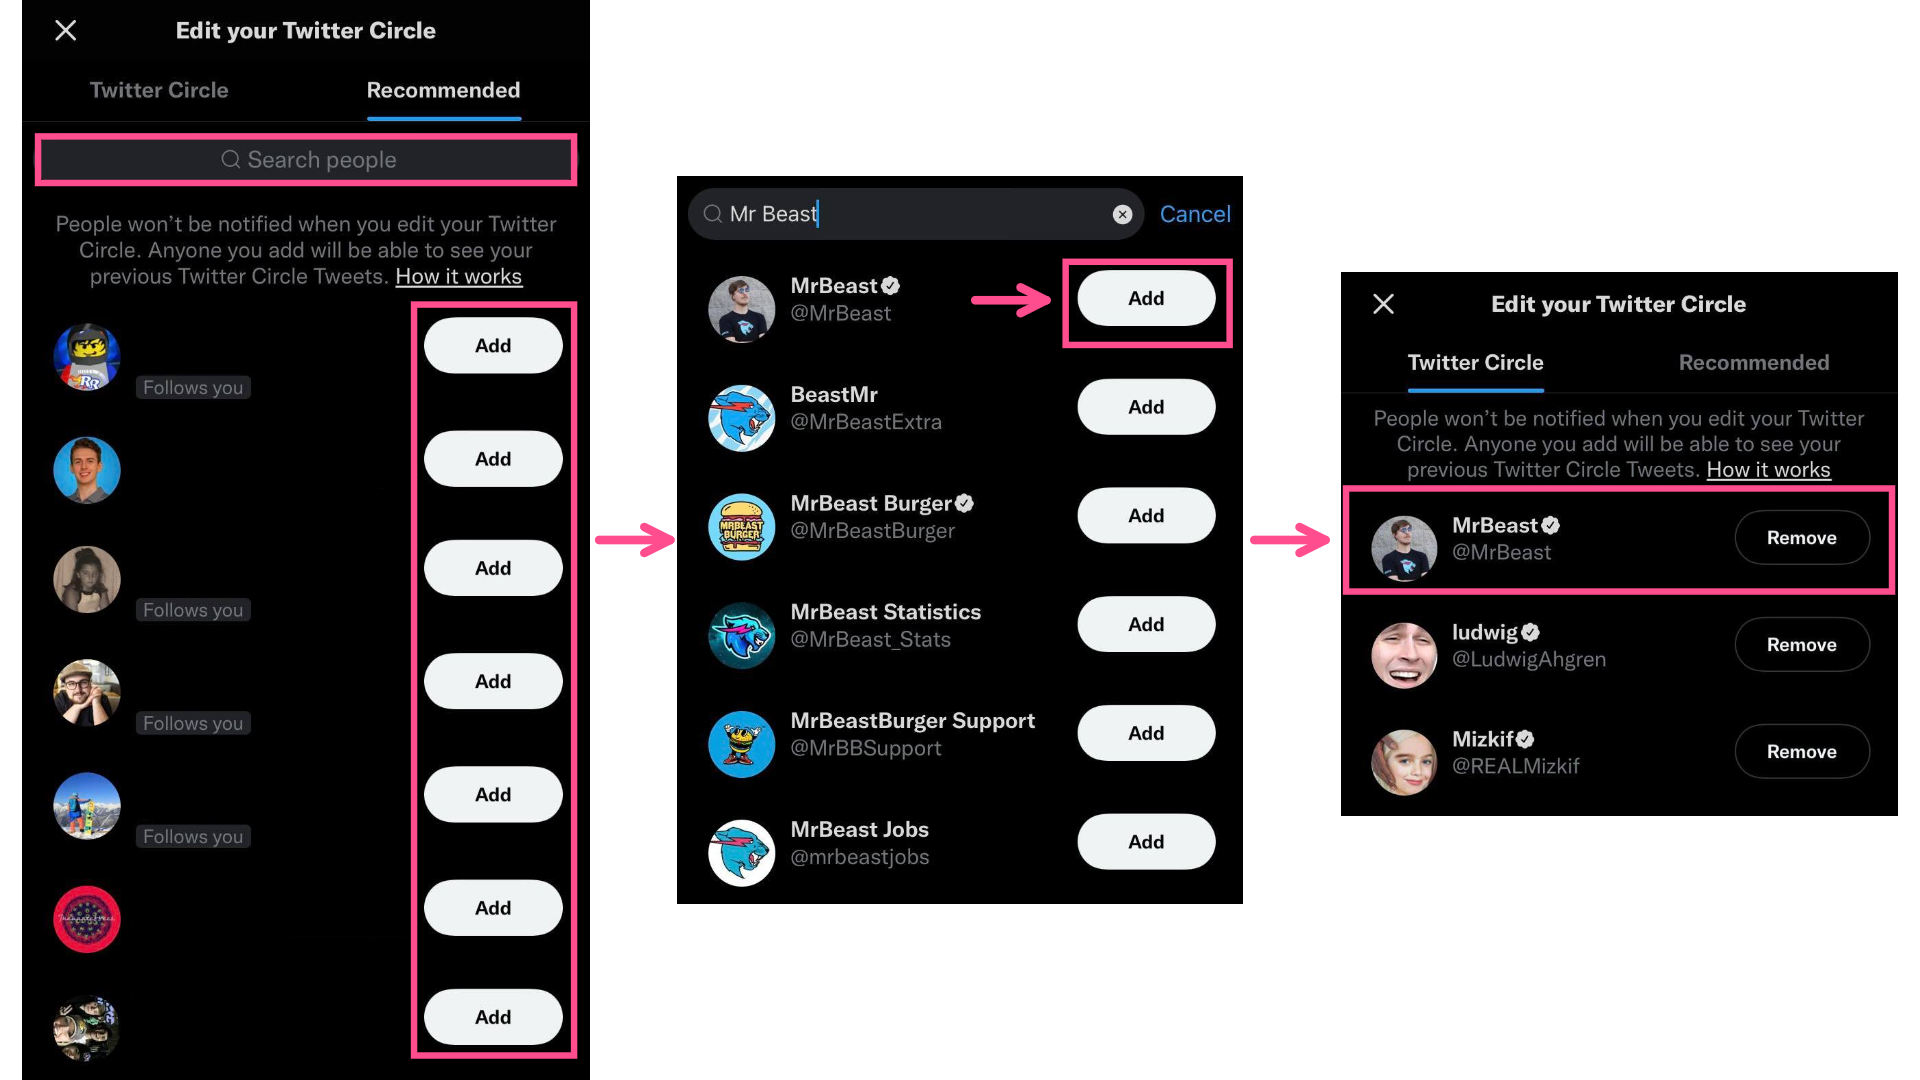 Screenshots showing how to add and remove users from your Twitter Circle